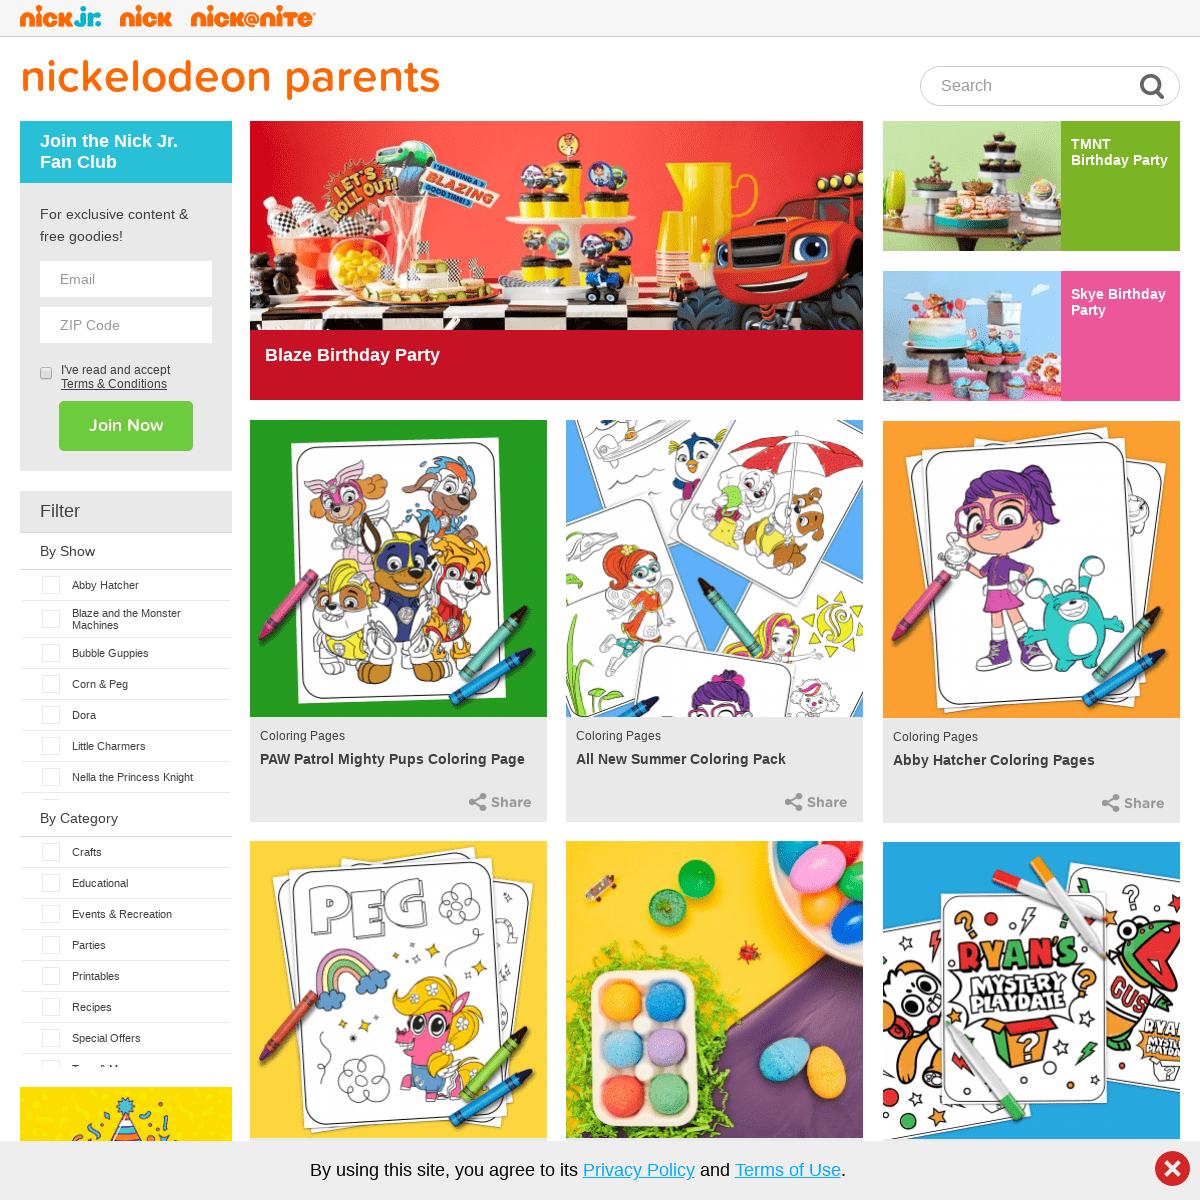 Nickelodeon Parents | Printables, coloring pages, recipes, crafts, and more from your child’s favorite Nickelodeon and Nick Jr. 